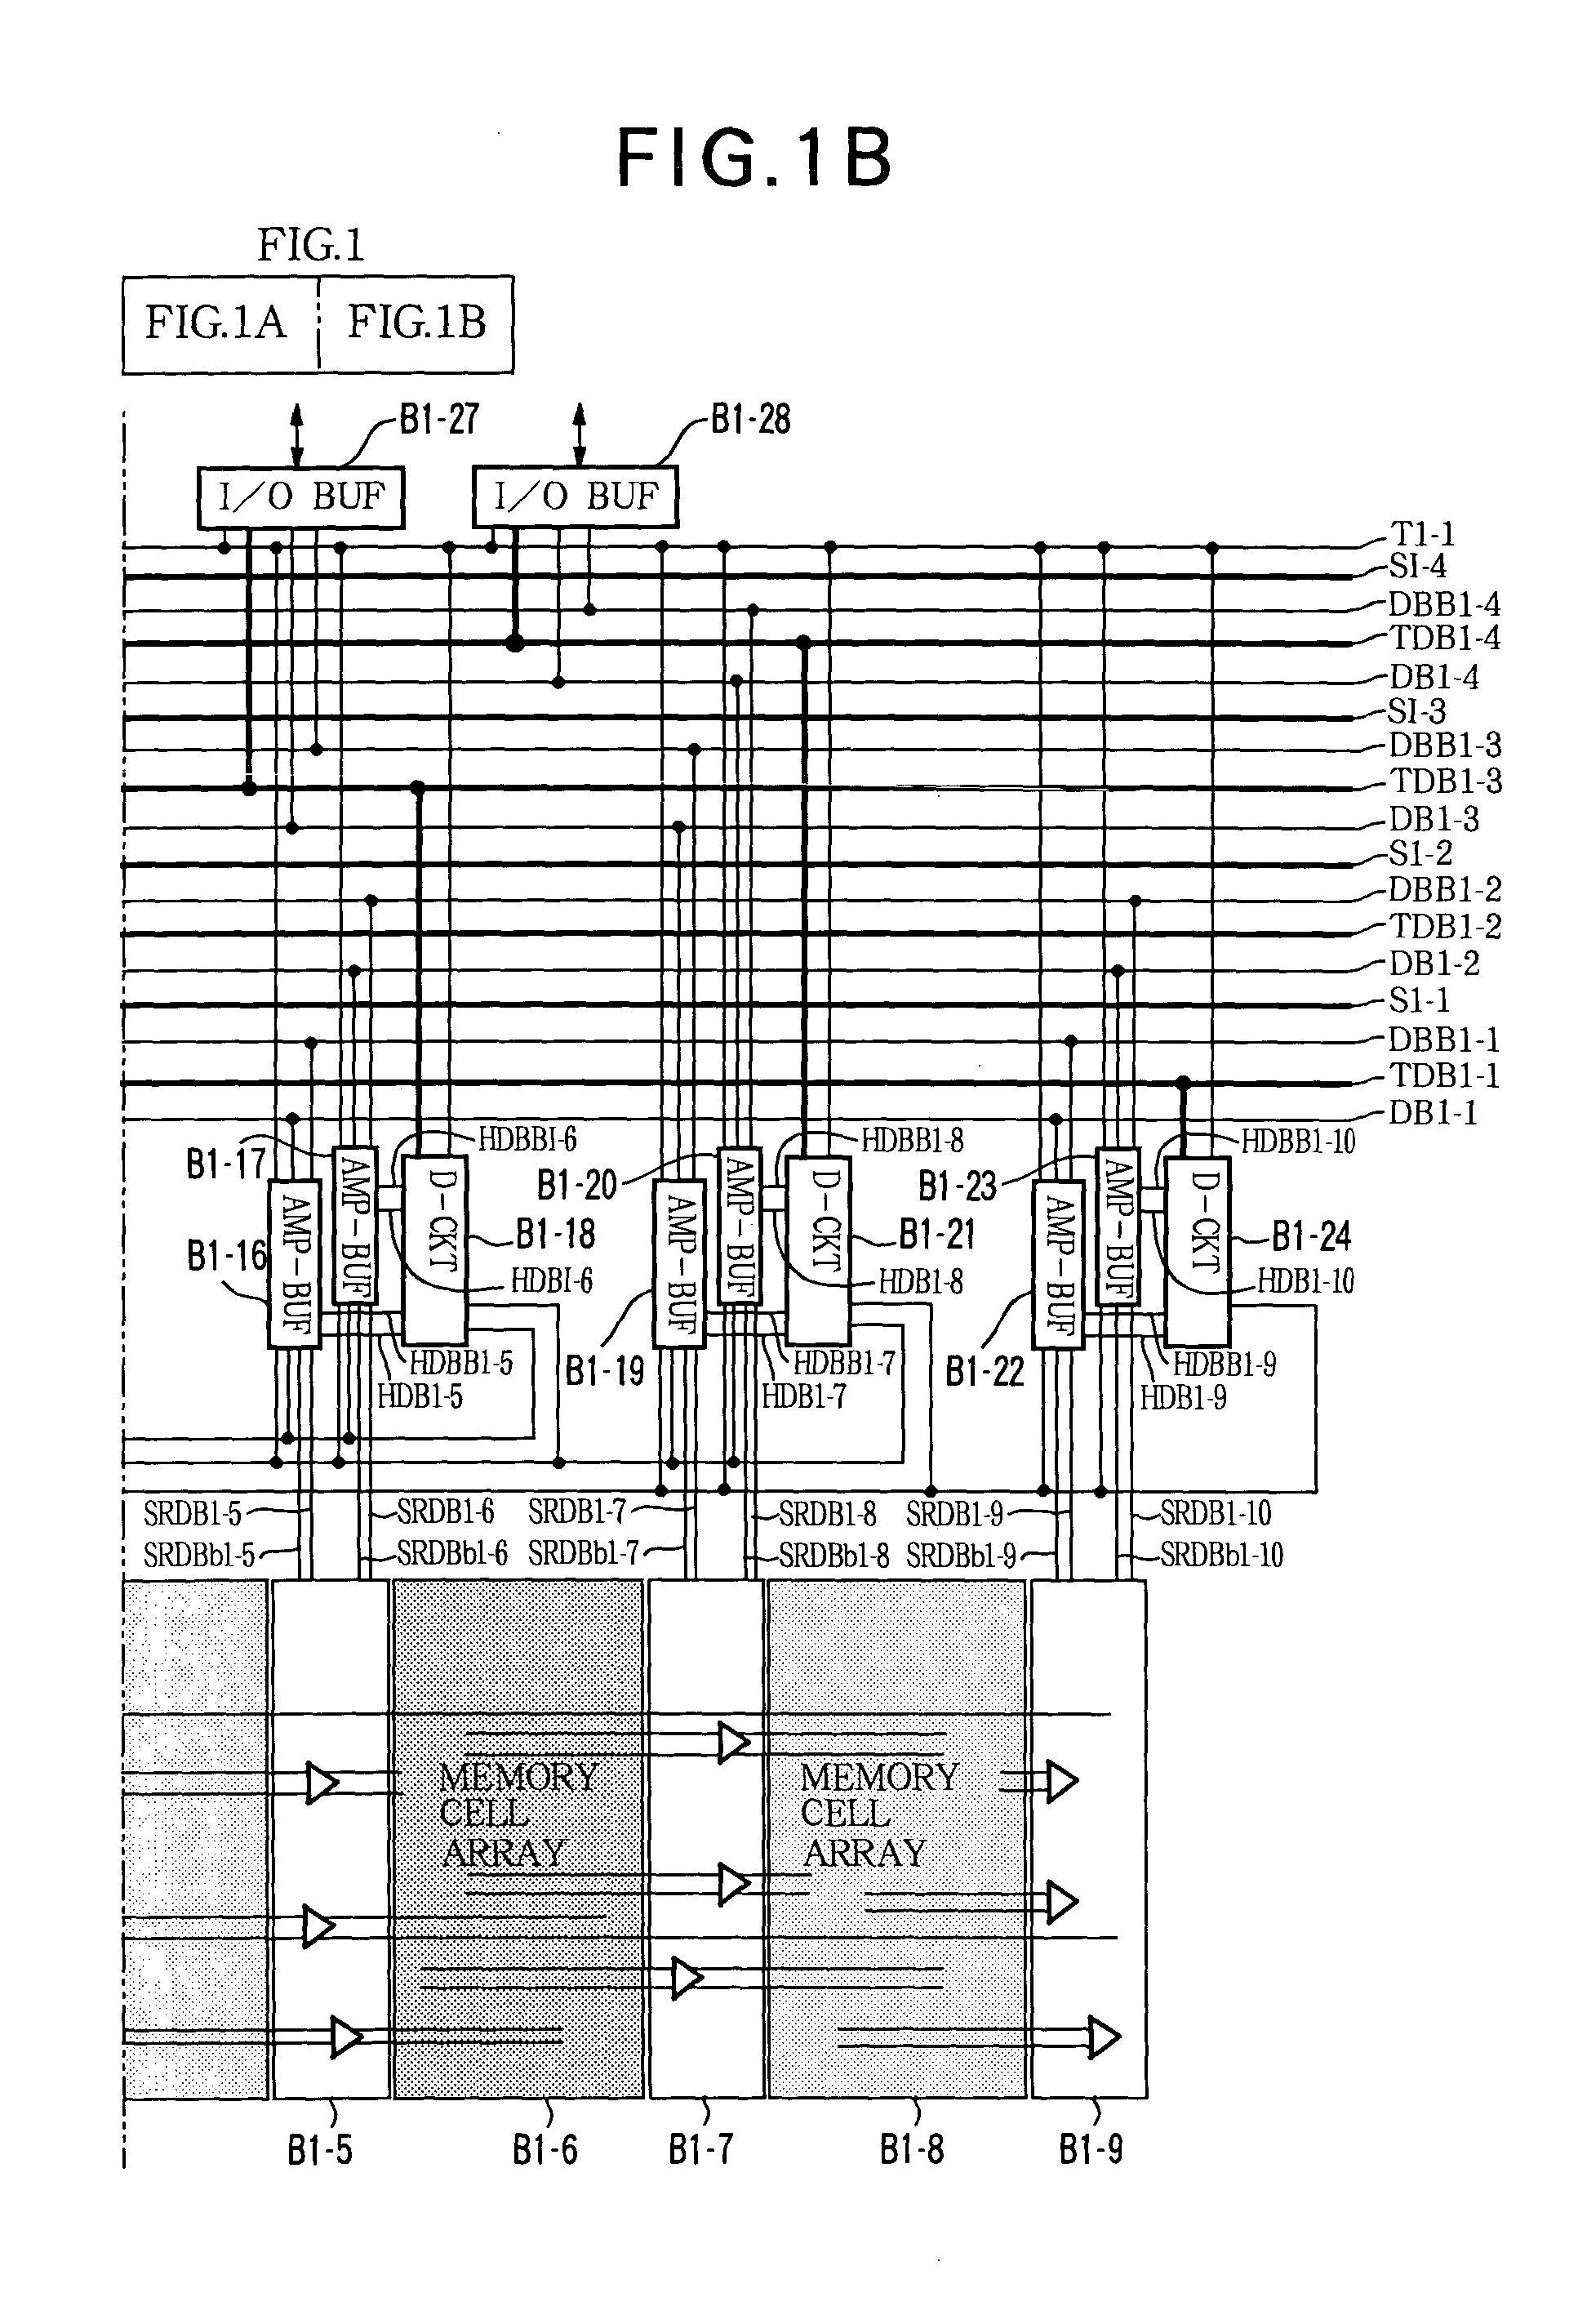 Rapidly testable semiconductor memory device